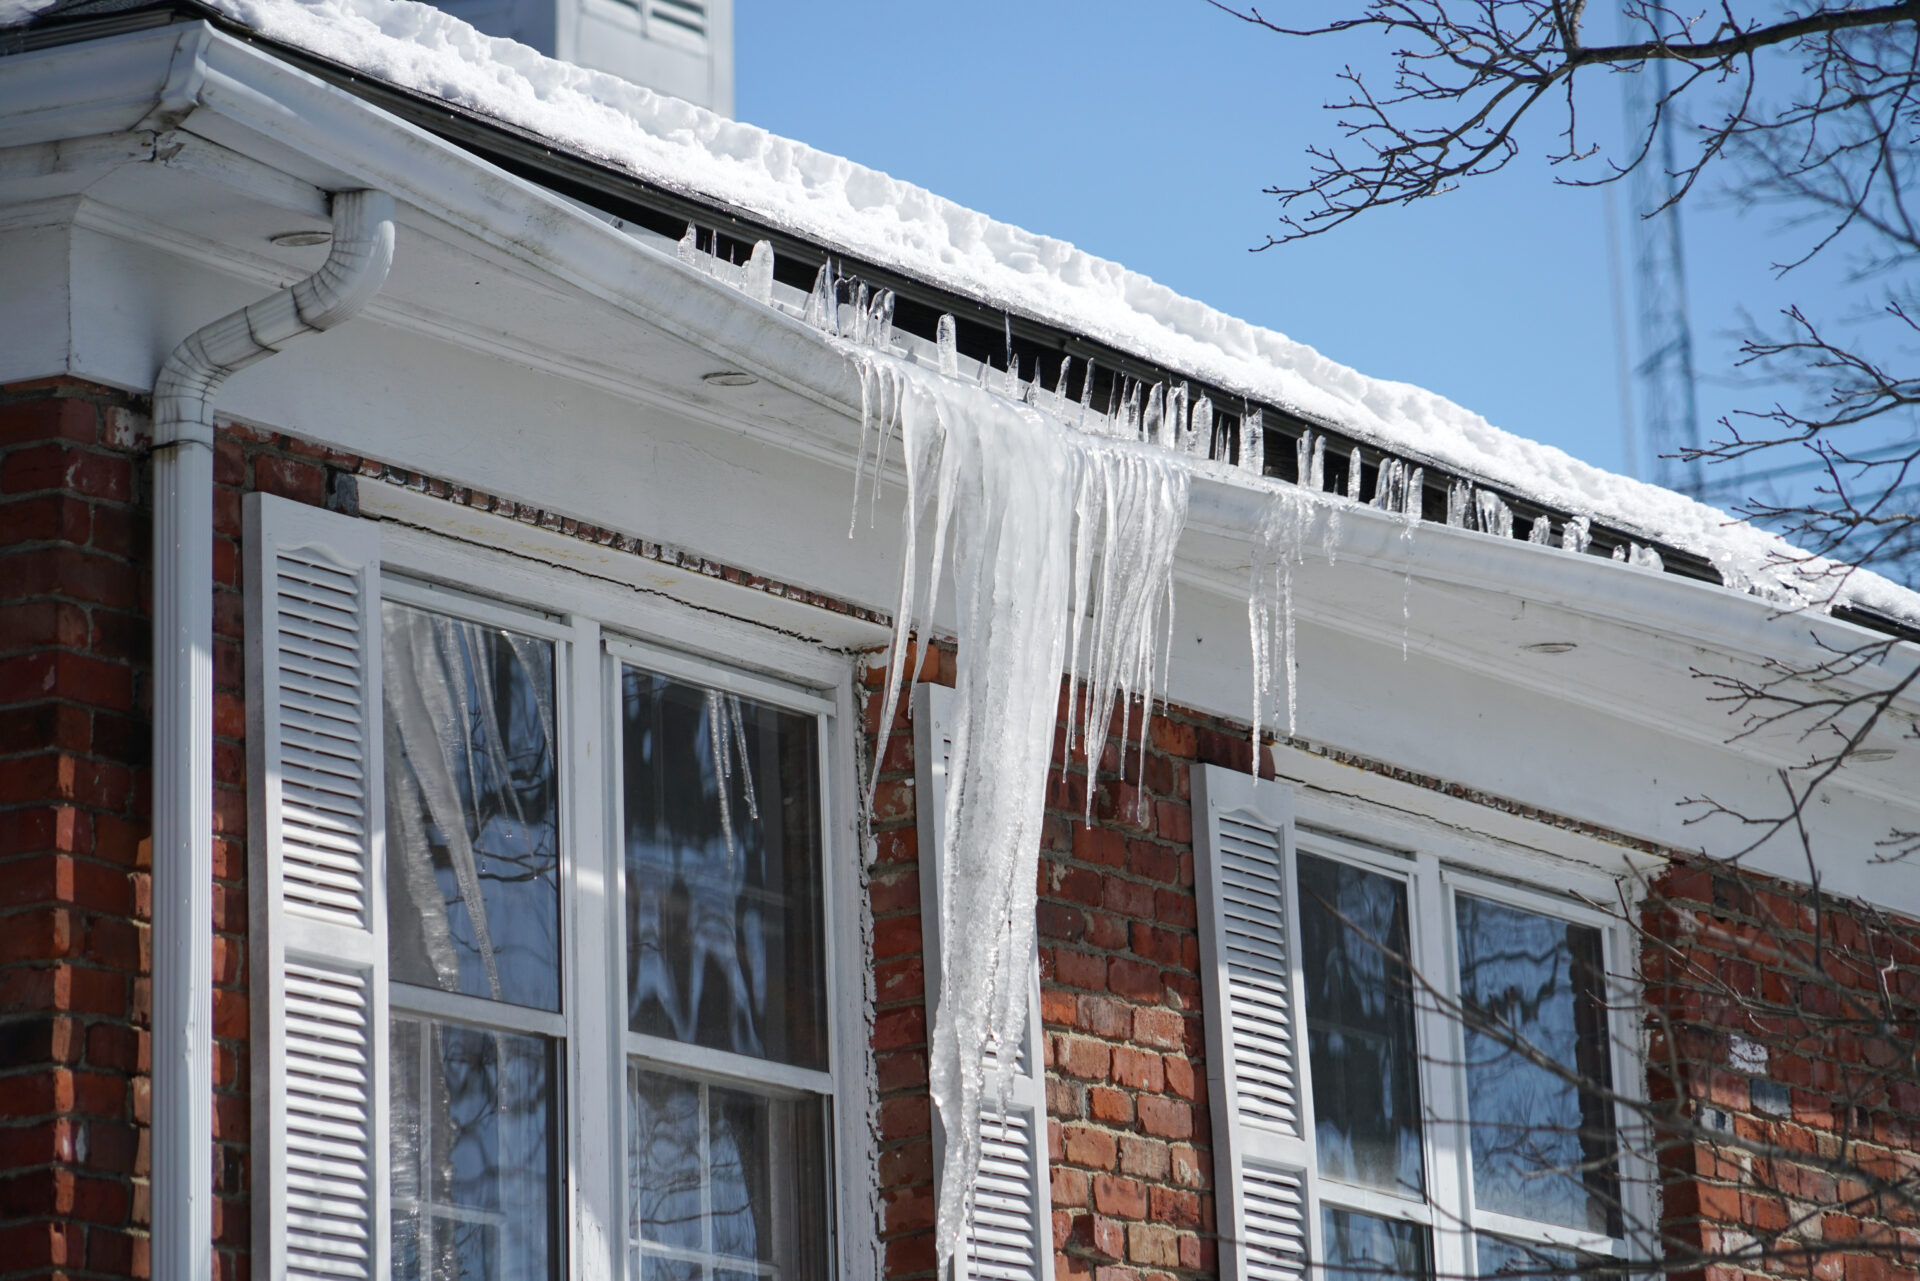 Icicle on the house roof in winter season during cold snap. MidCity Plumbers